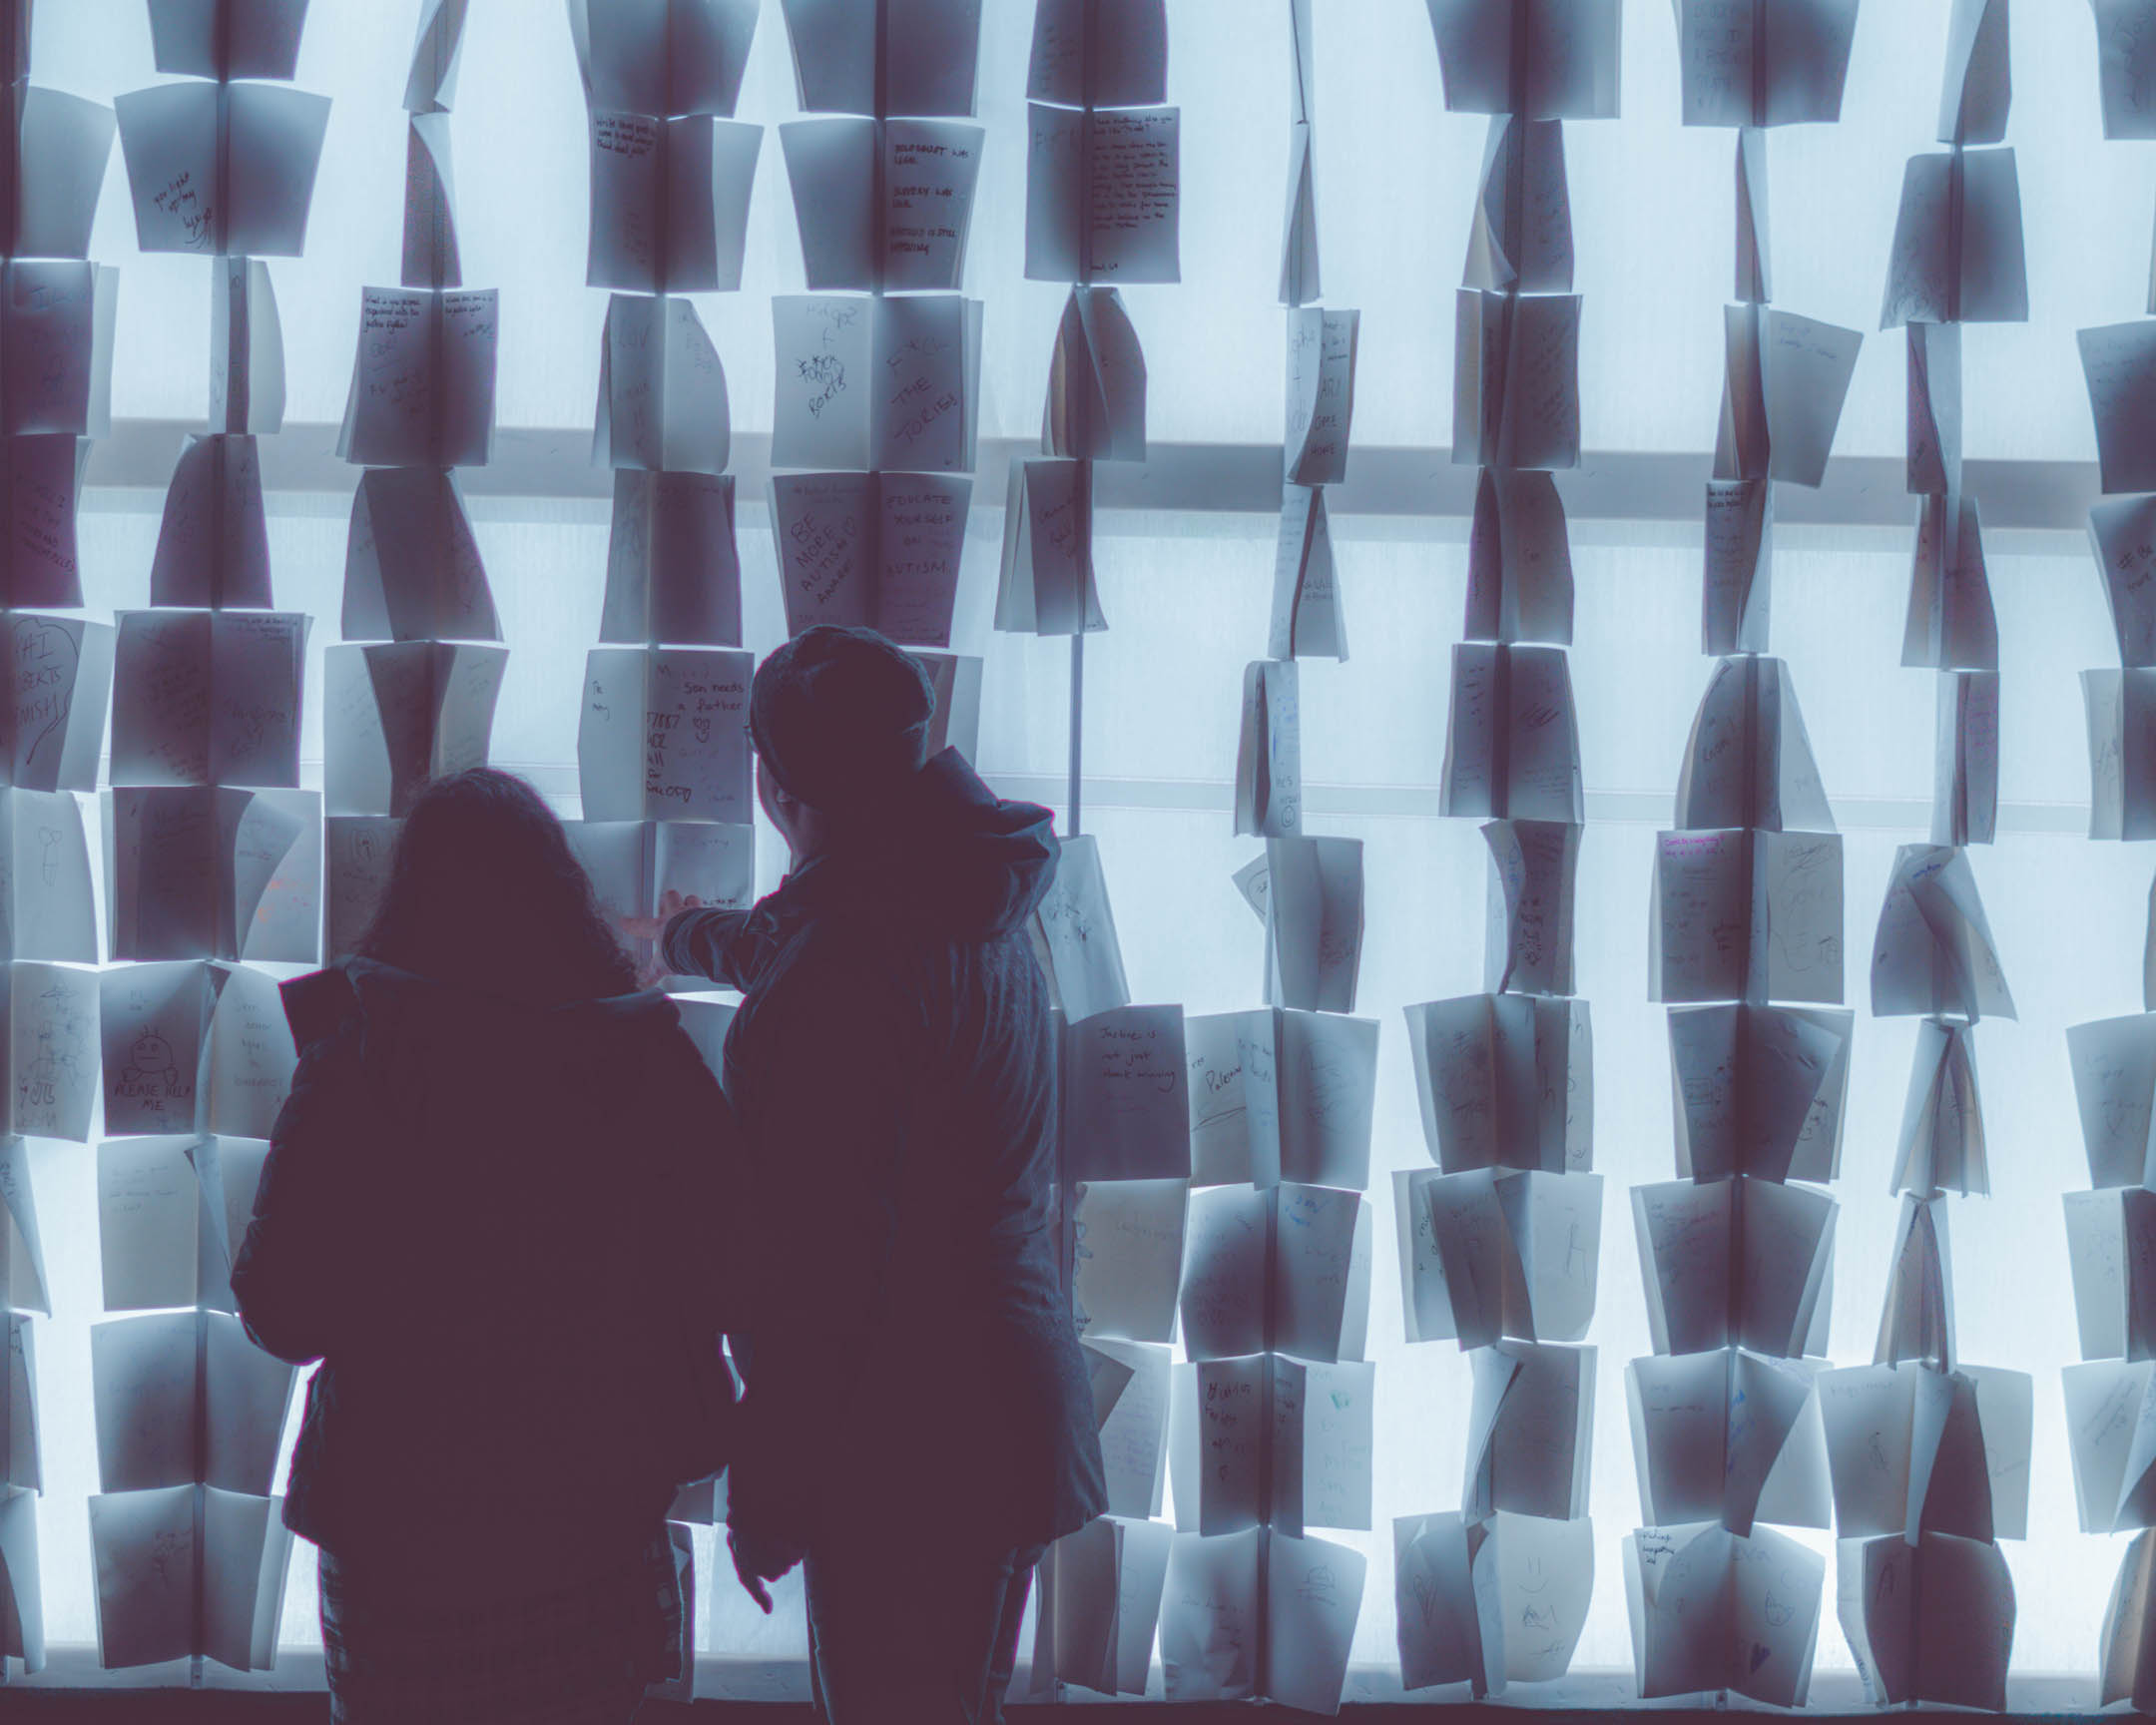 Photograph of a two people in front of a display at Lumiere.